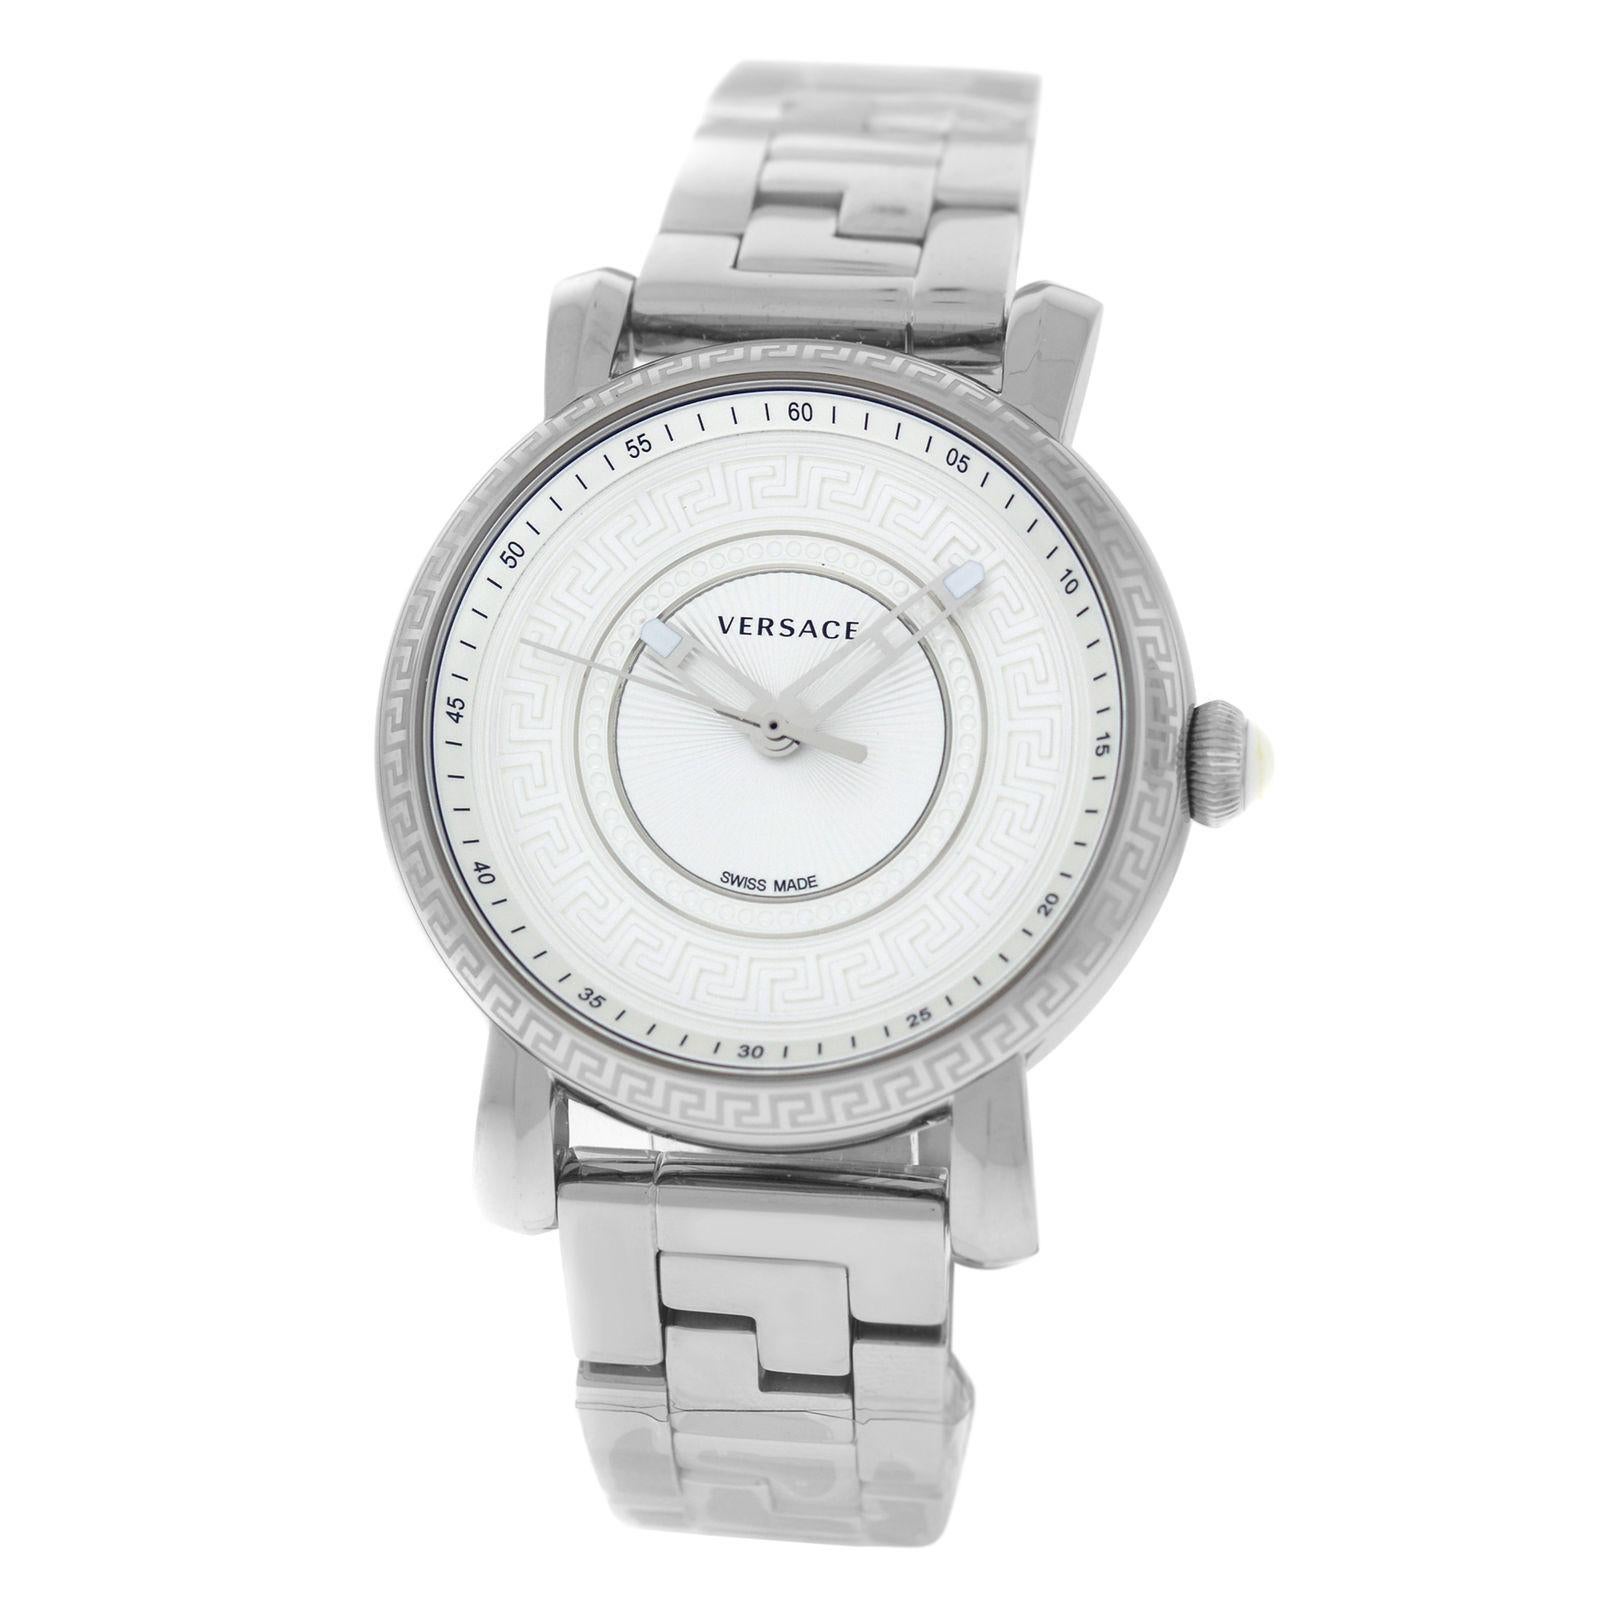 Authentic New Versace Day Glam Stainless Steel Quartz Watch In Excellent Condition For Sale In New York, NY